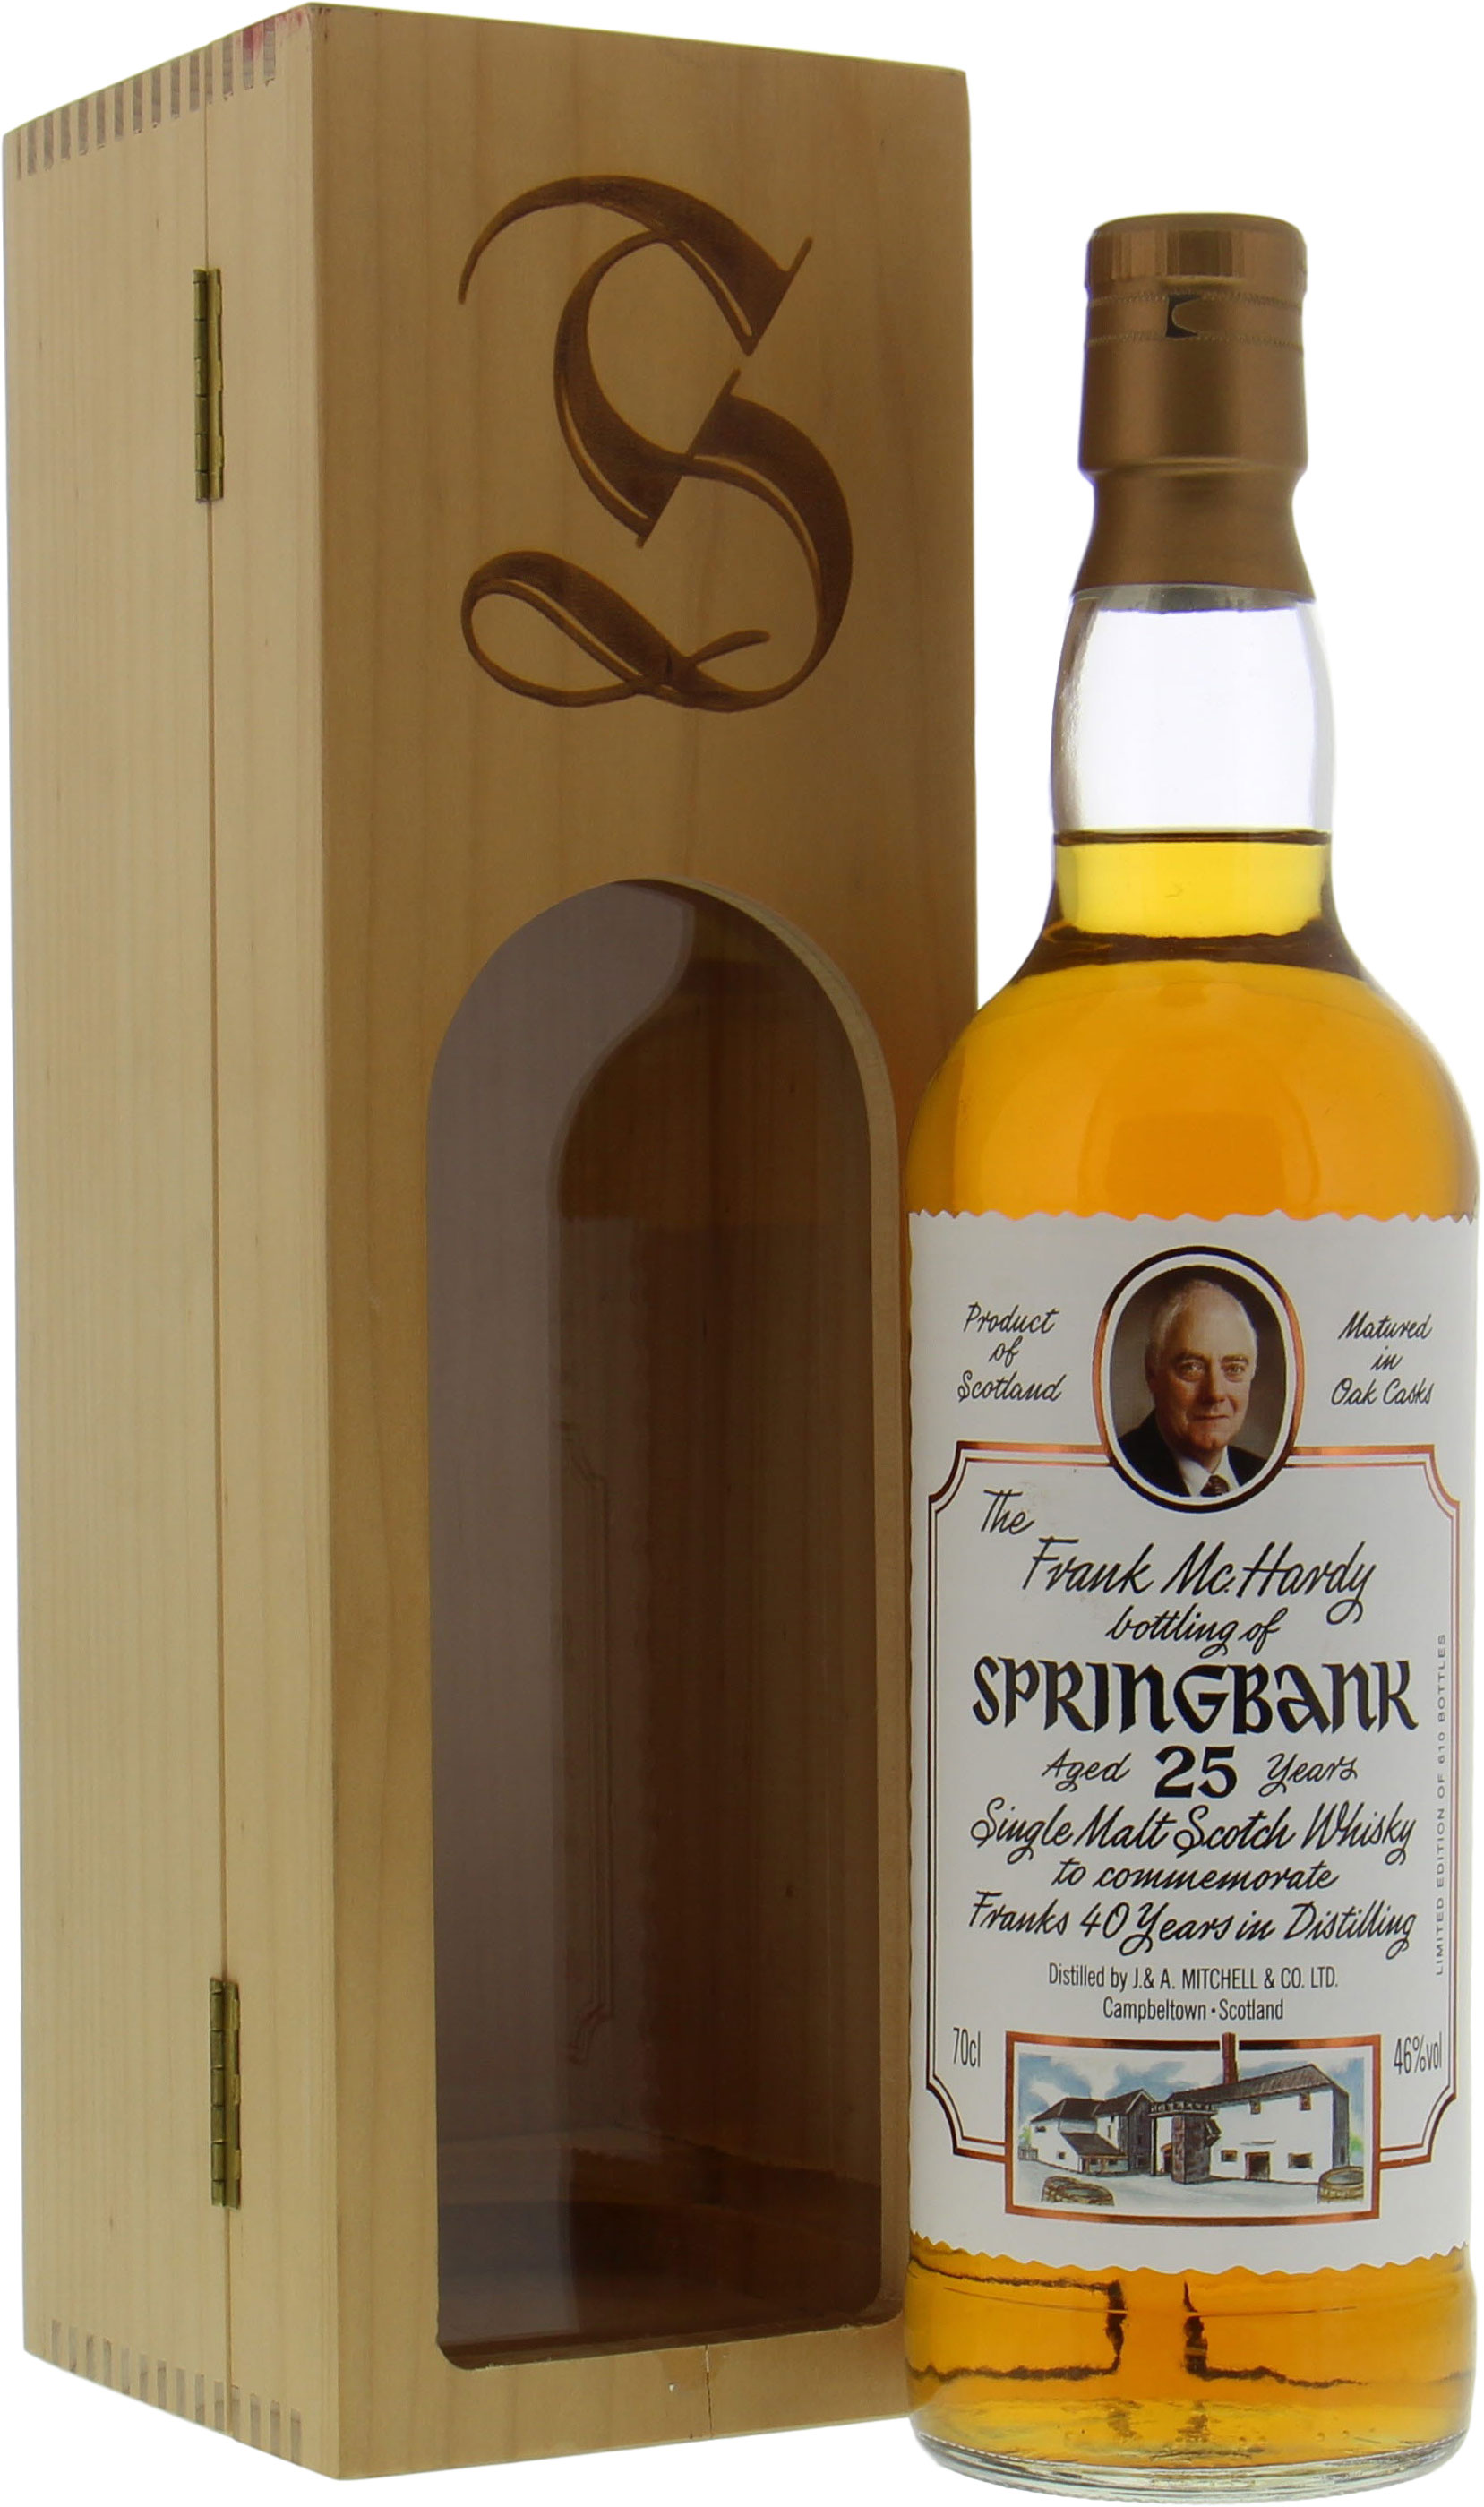 Springbank - 25 Years Old Frank McHardy 40 Years in Distilling 46% 1974